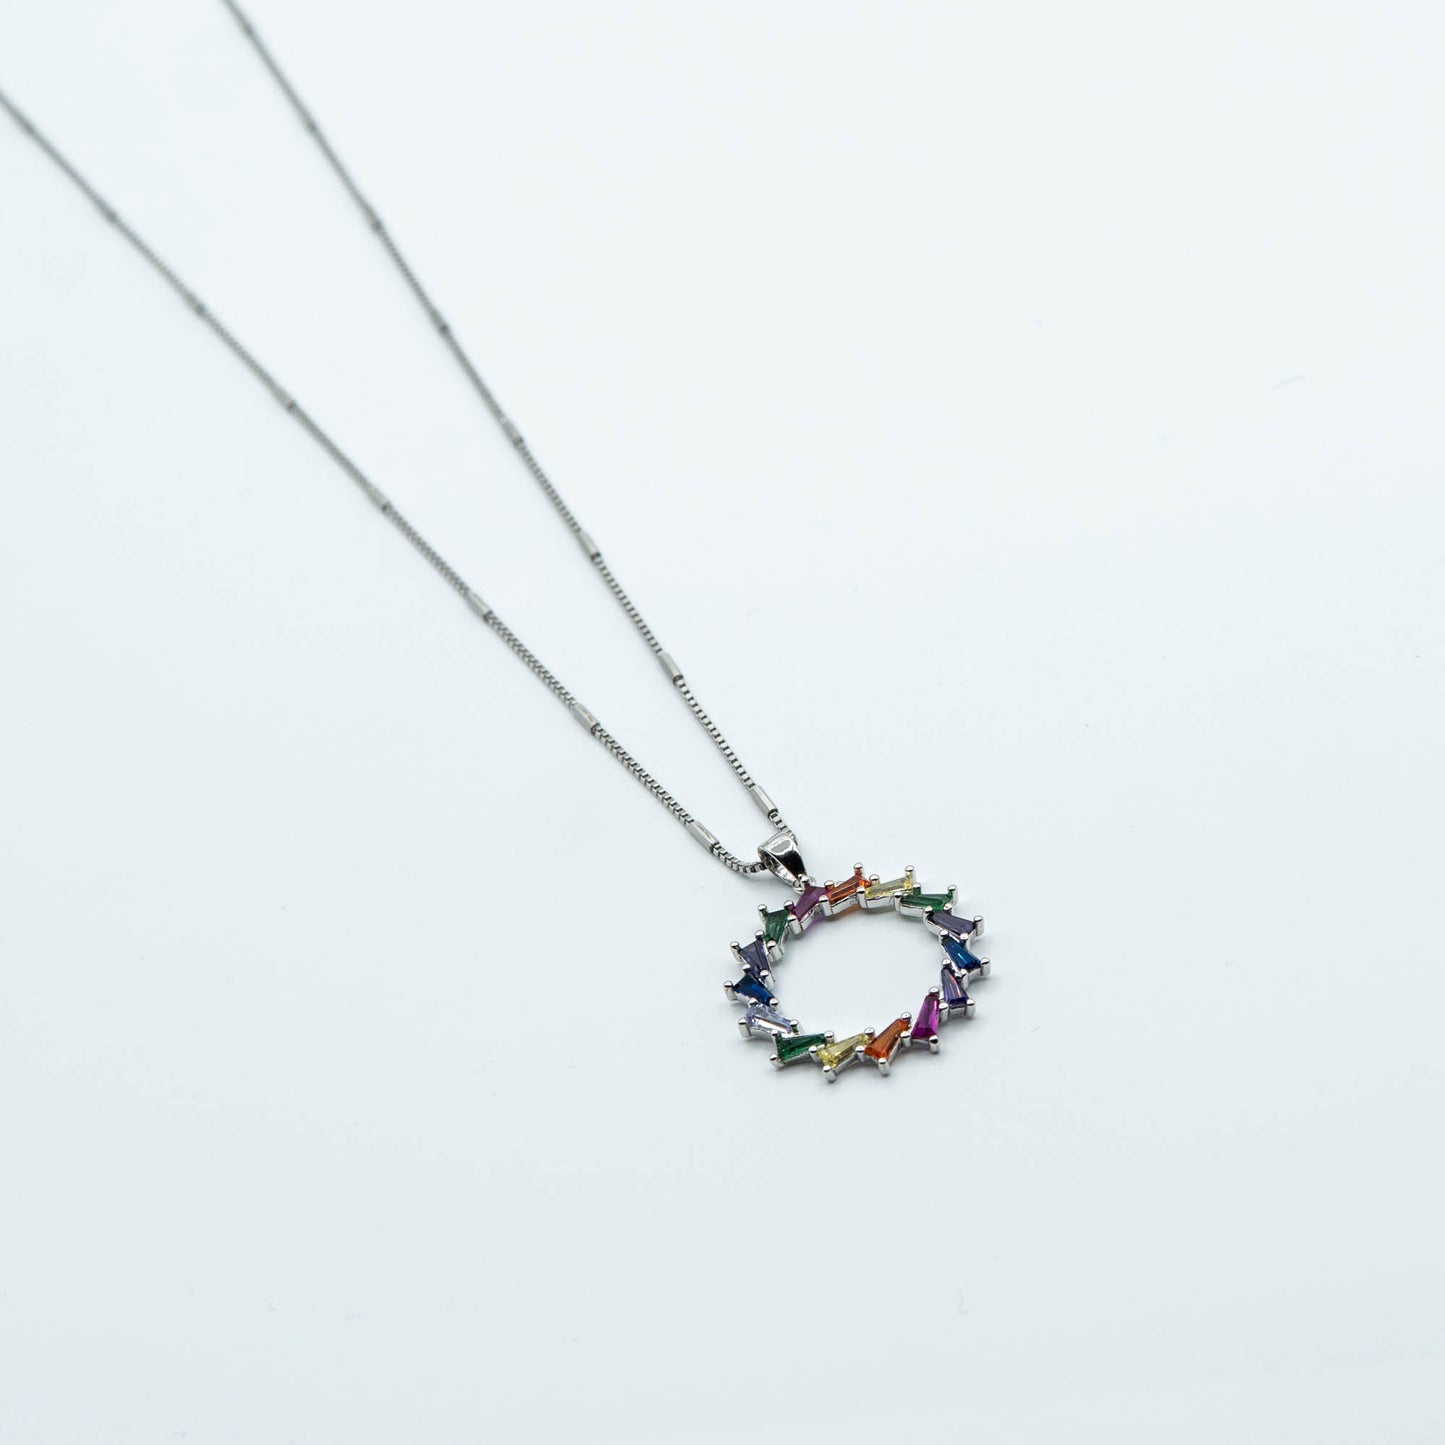 DK-925-445 circle of friendship necklace